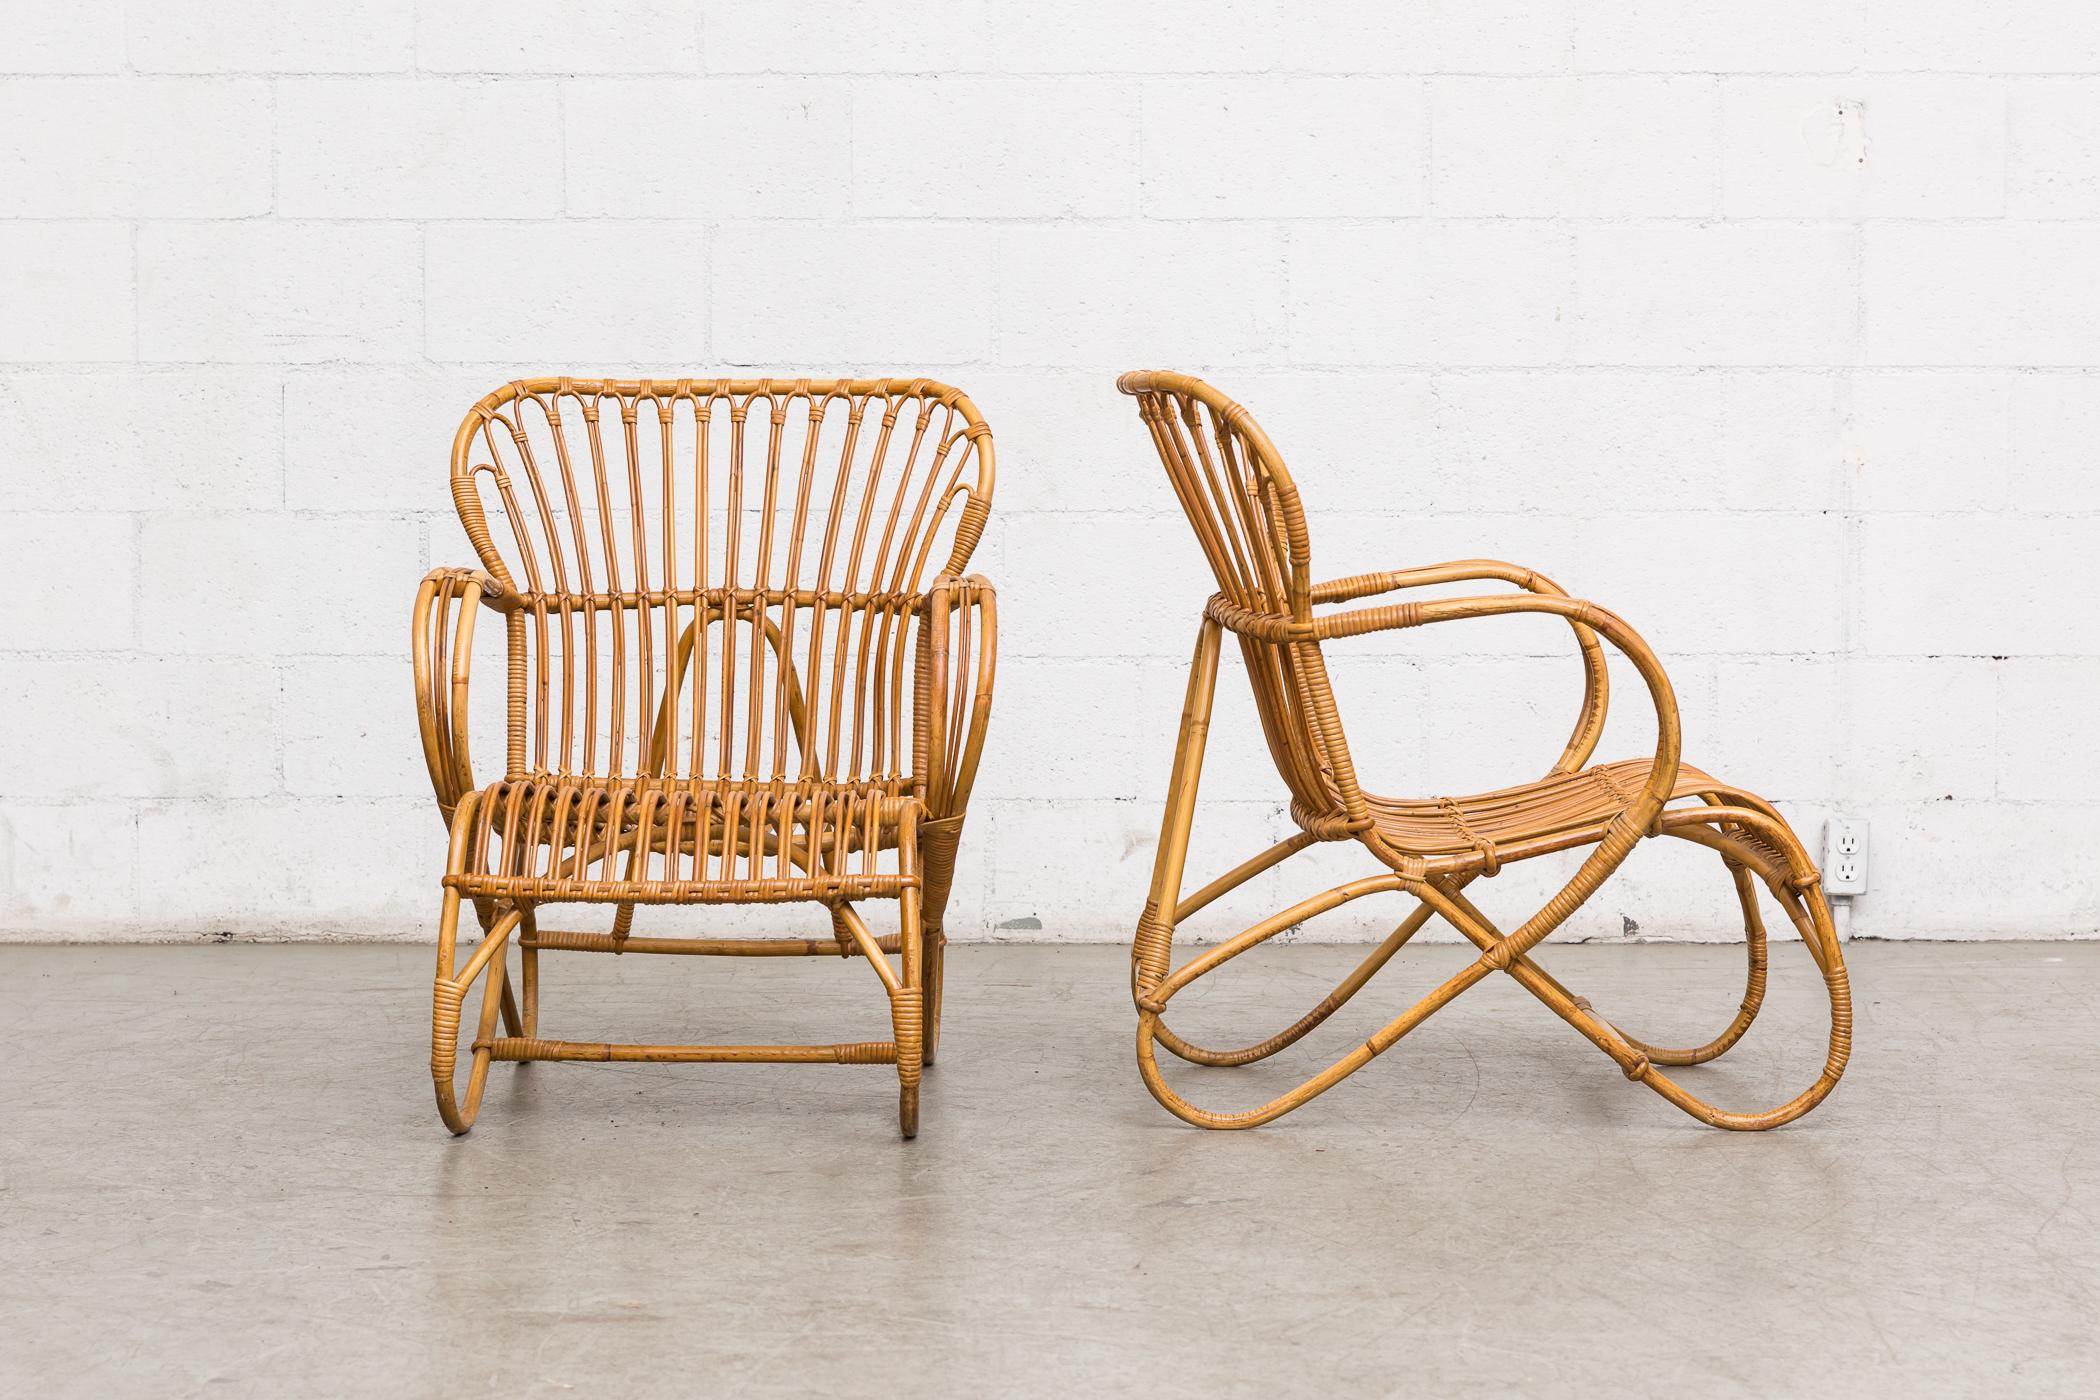 Lovely pair of Franco Albini style bamboo lounge chairs in original condition with minimal bamboo loss. Visible wear Consistent with their age and usage. Set price.